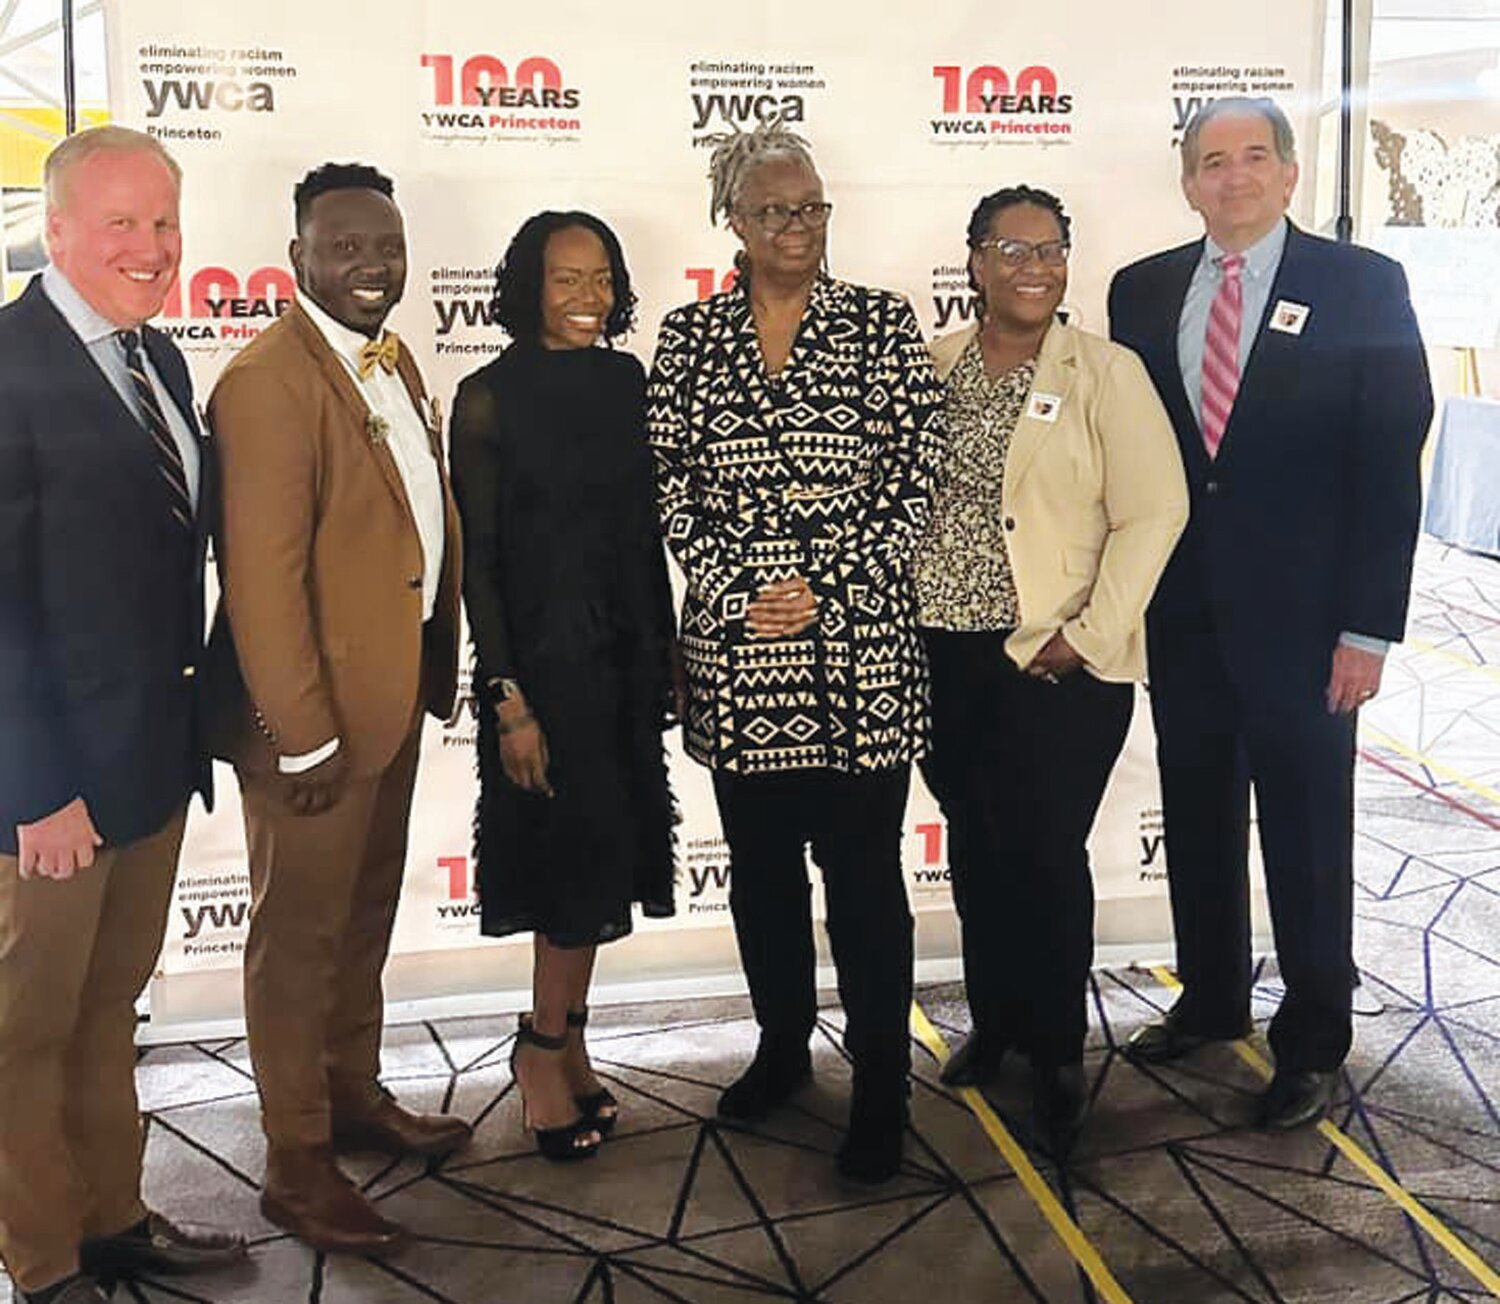 Foundation Academies Chief Executive Officer Sheria McRae, third from left, was honored at the YWCA Princeton Tribute to Women Awards ceremony this spring. Kimme Carlos is fourth from left.